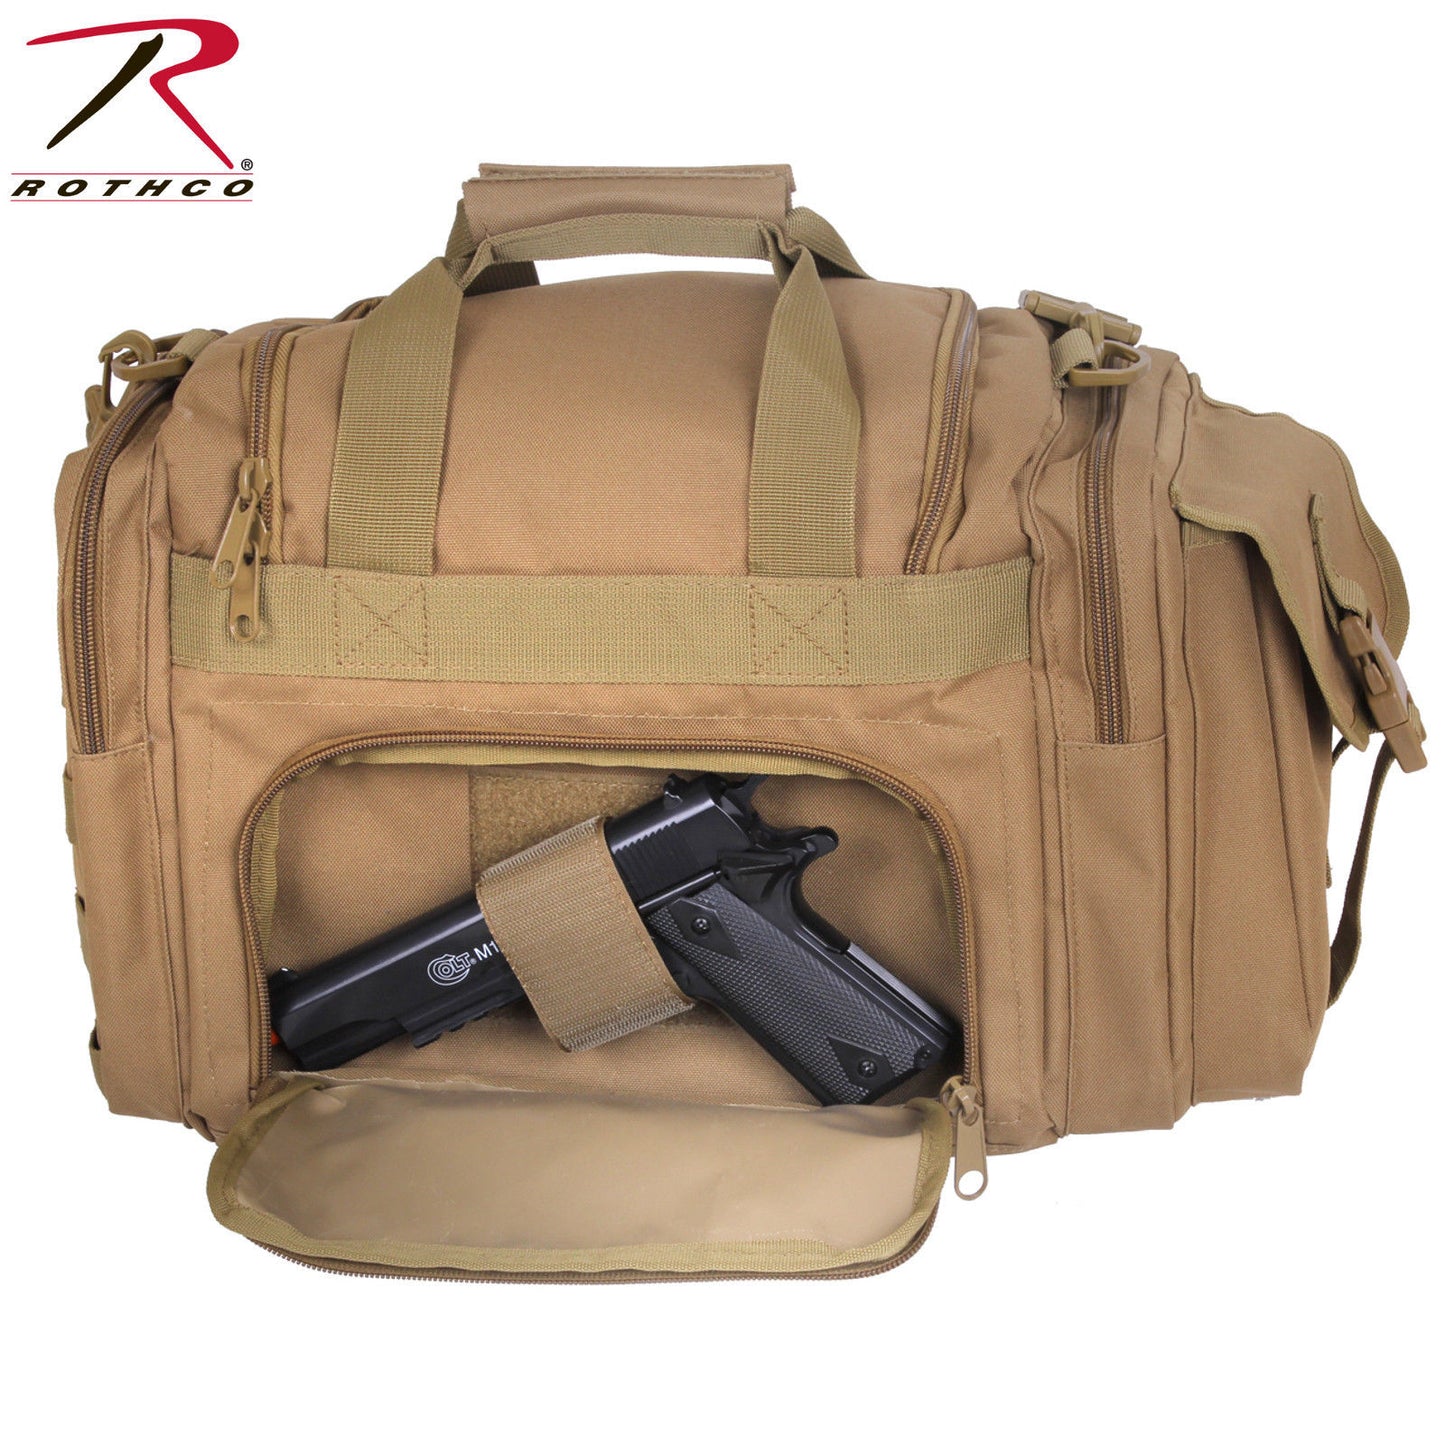 Rothco Concealed Carry Bag - Coyote Brown Heavyweight Polyester Gear Bag 2653